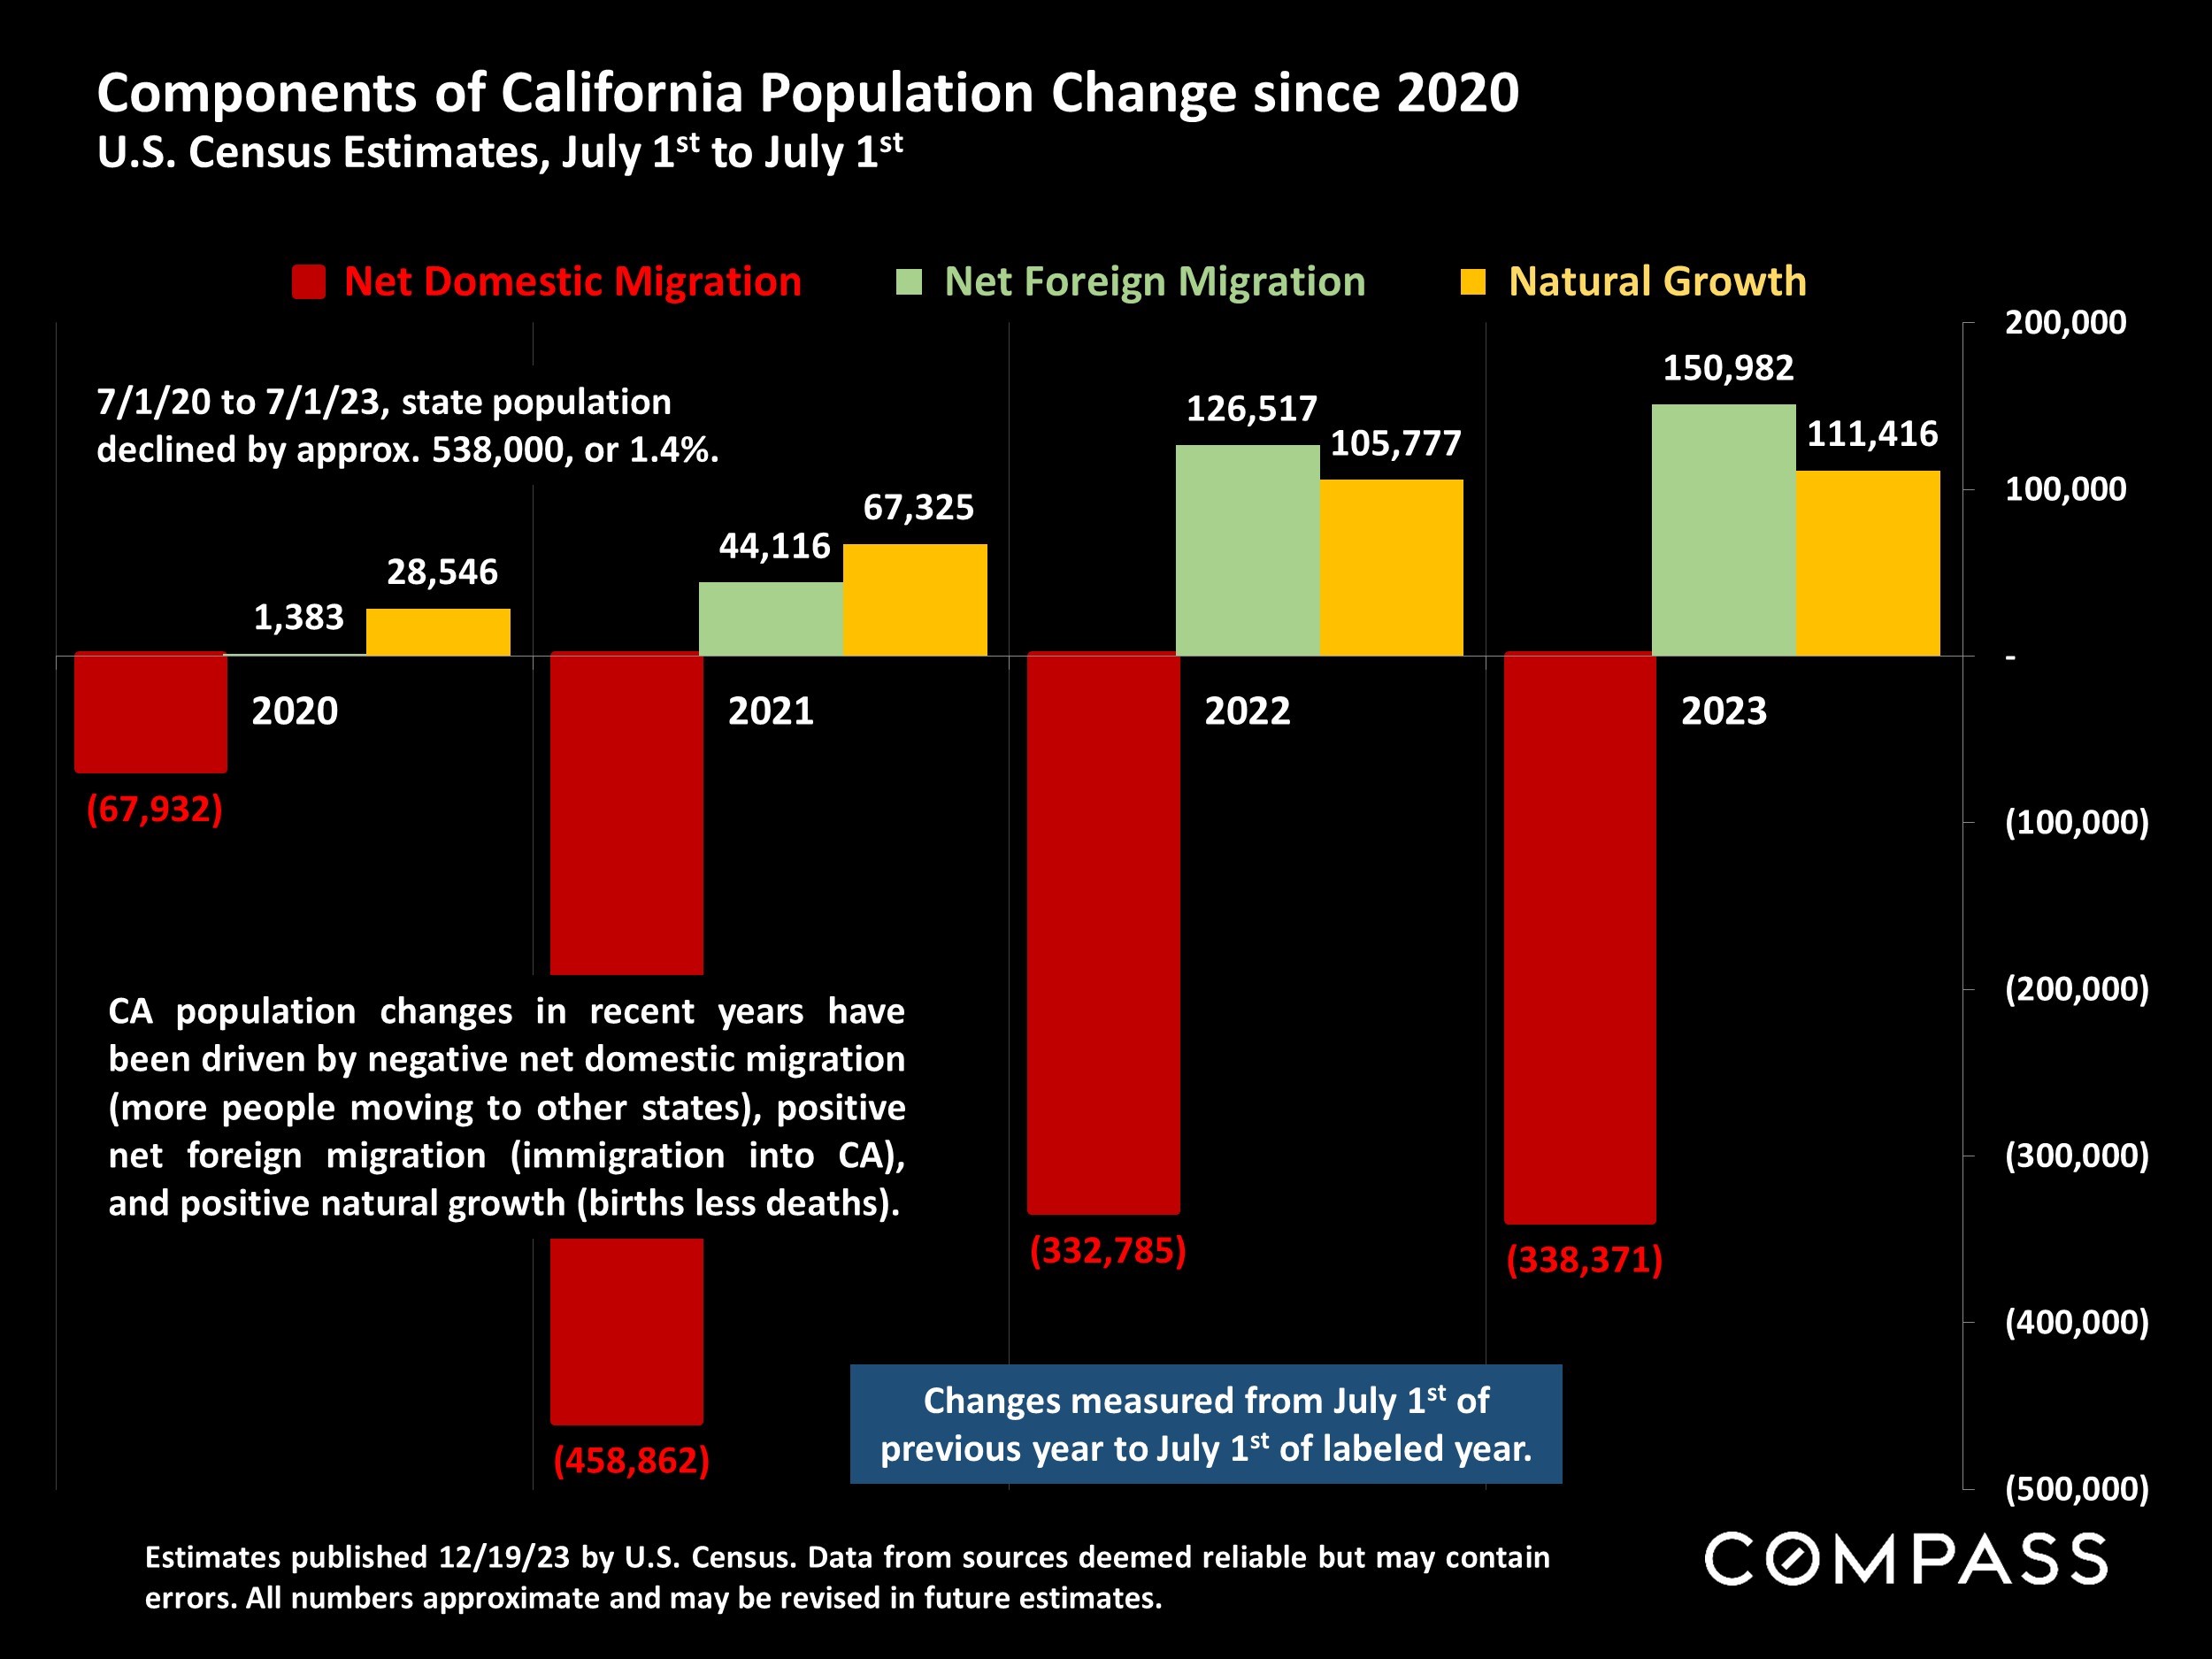 Components of California Population Change since 2020 U.S. Census Estimates, July 1st to July 1st